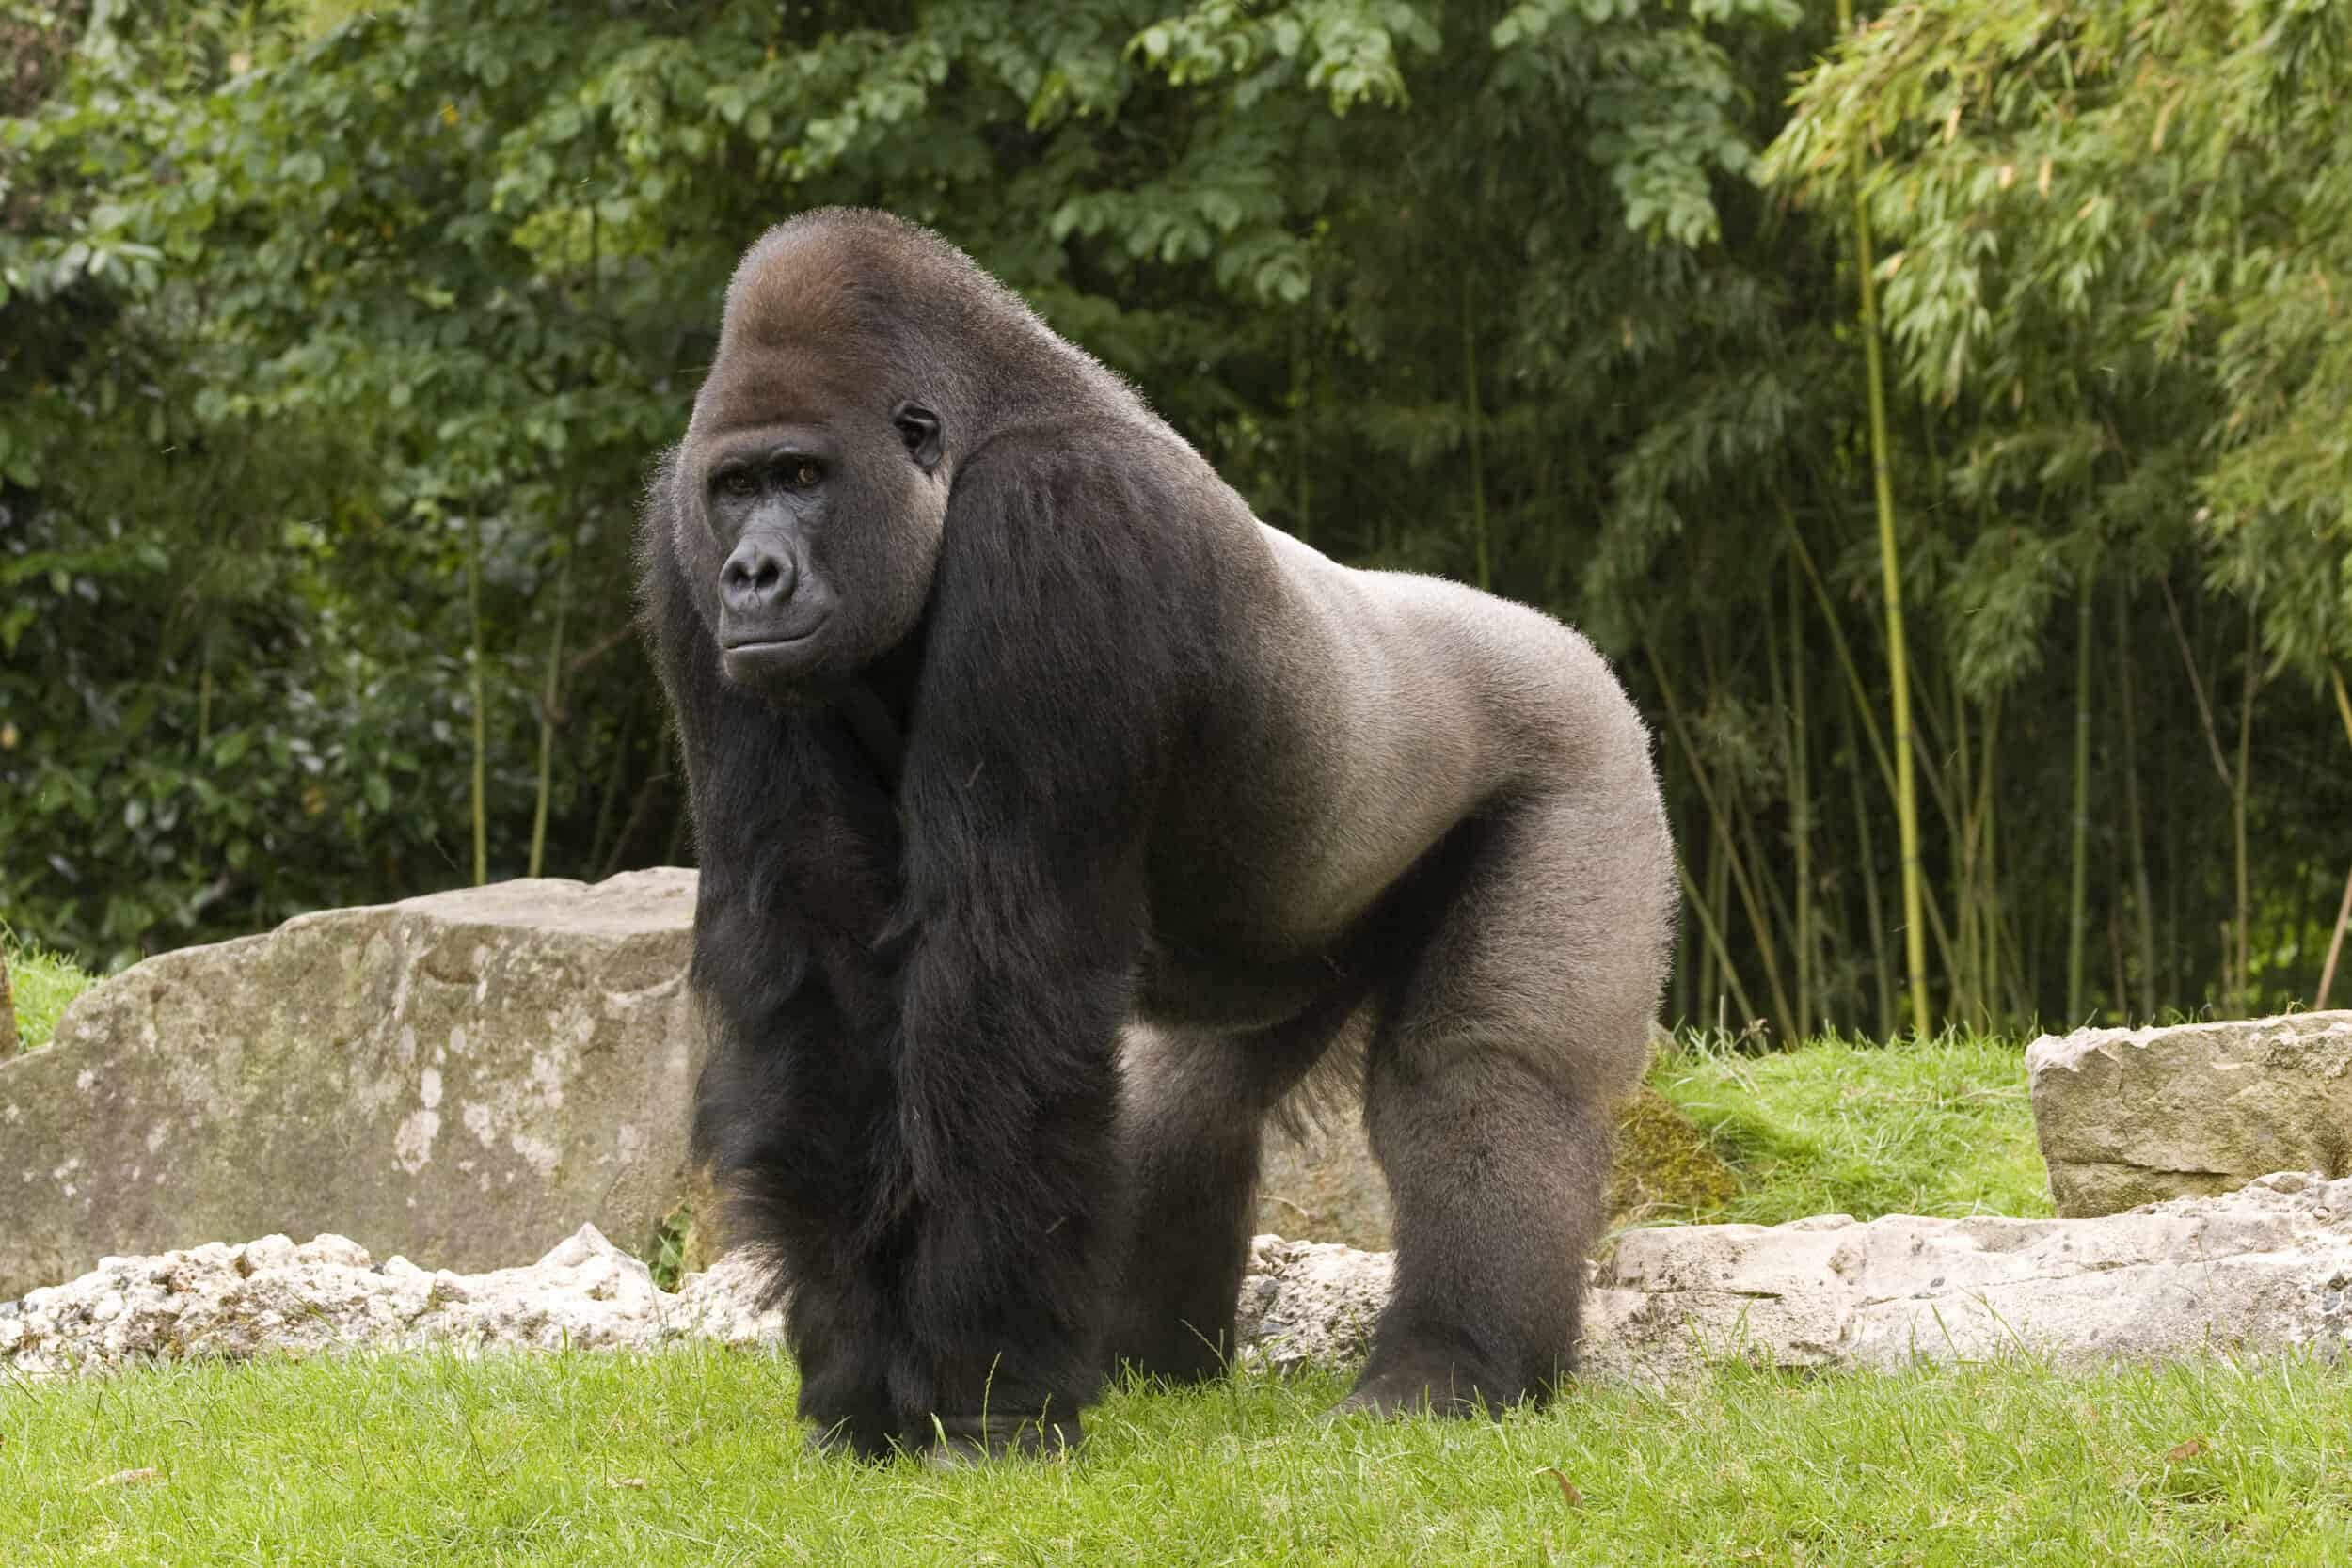 gorilla strength compared to human